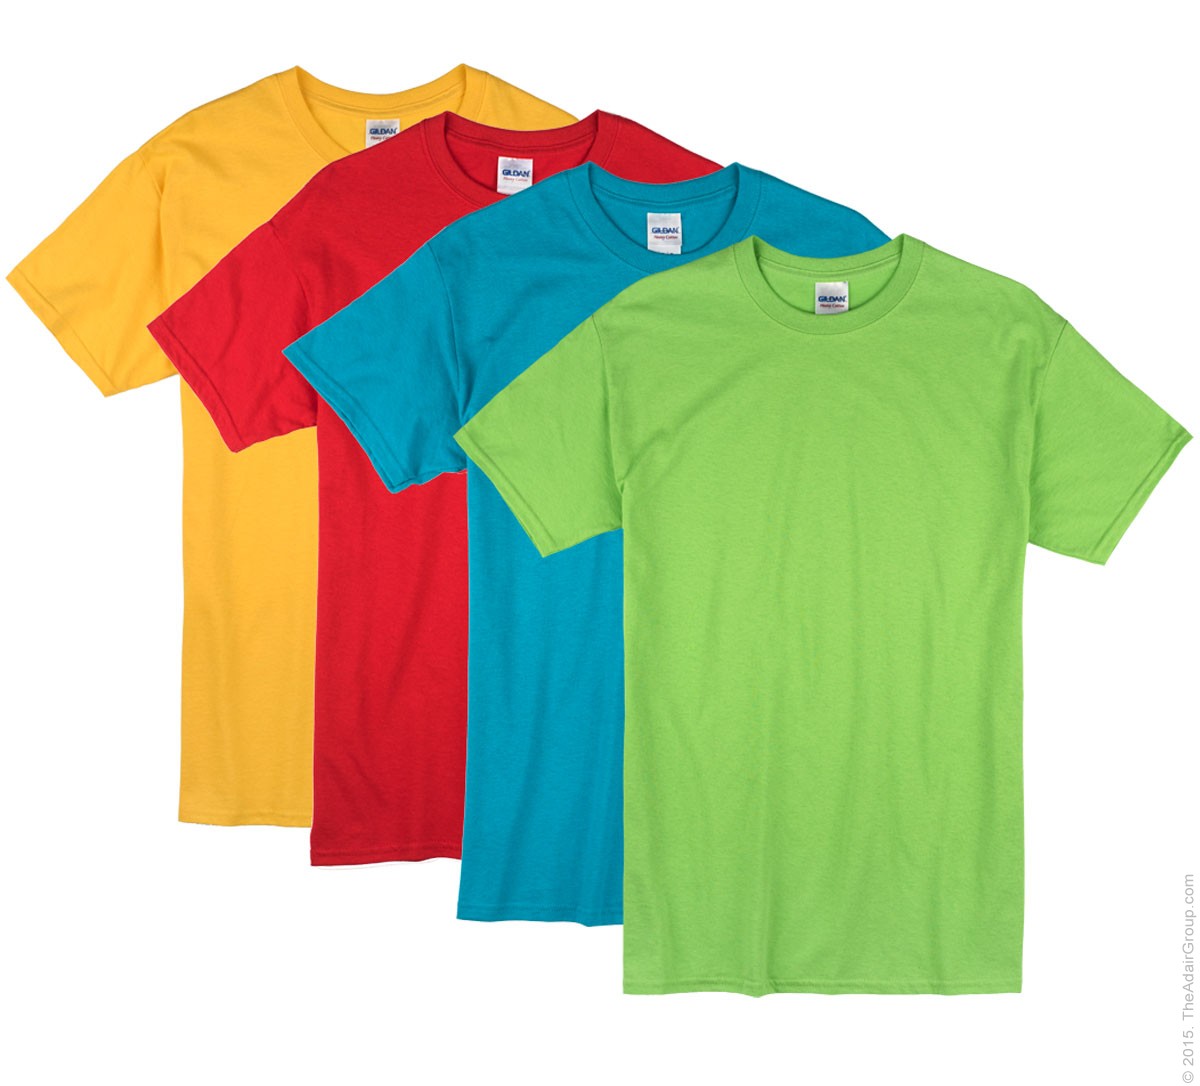 Cheap Colored T Shirts Shop, 60% OFF ...